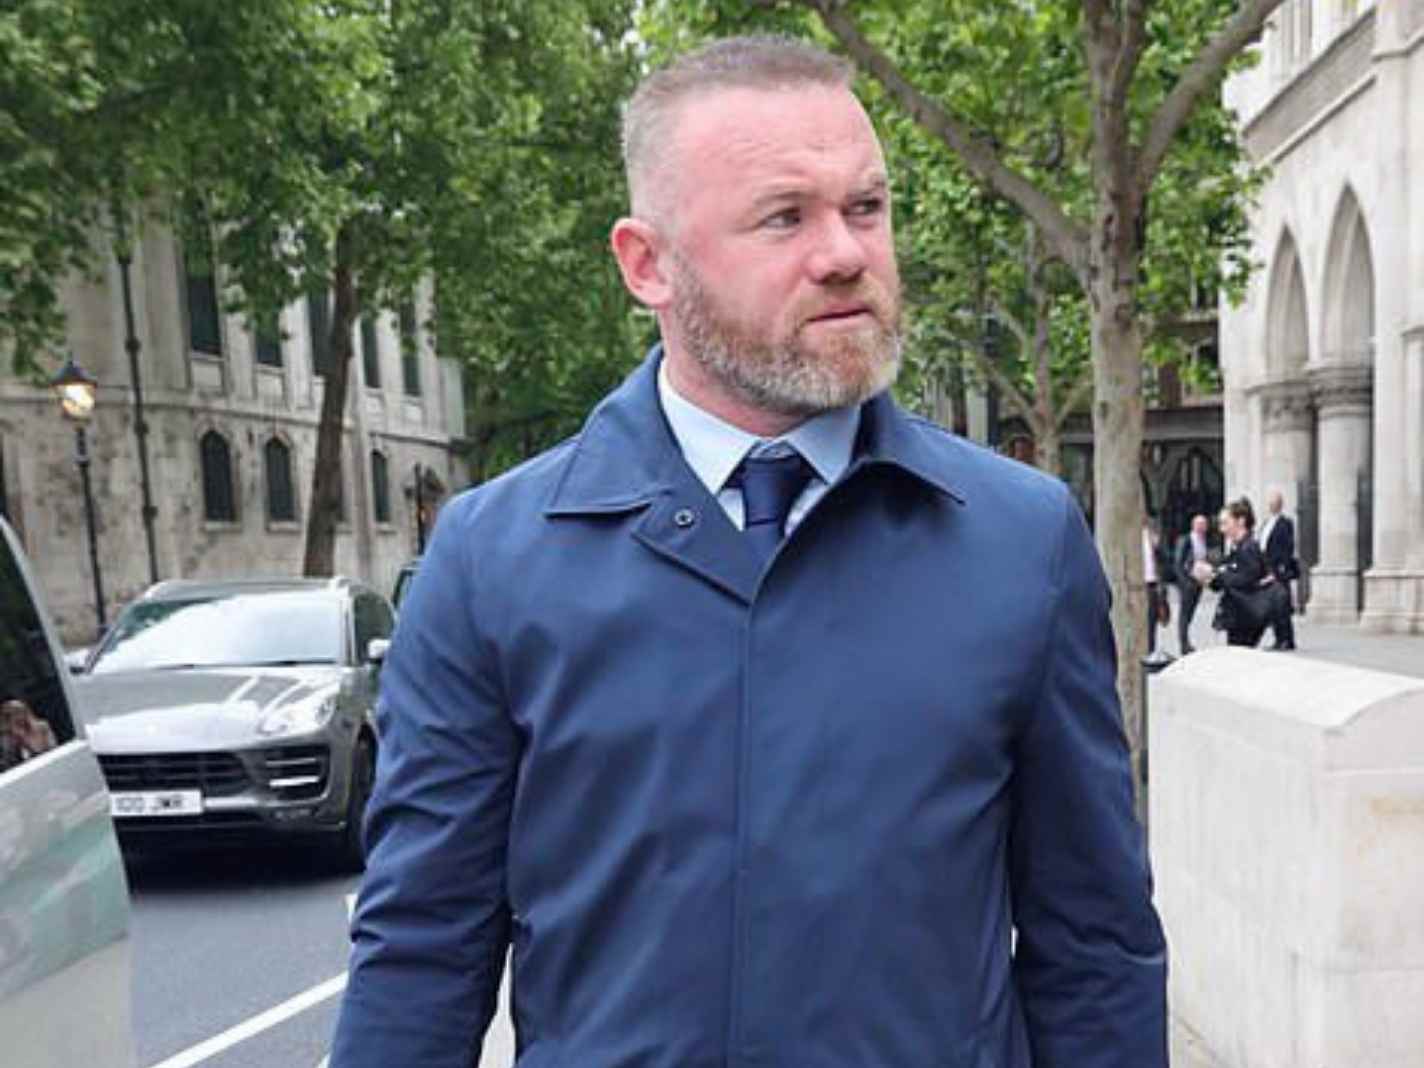 In this image - Wayne Rooney looking the part as he heads to court for wife's libel case.